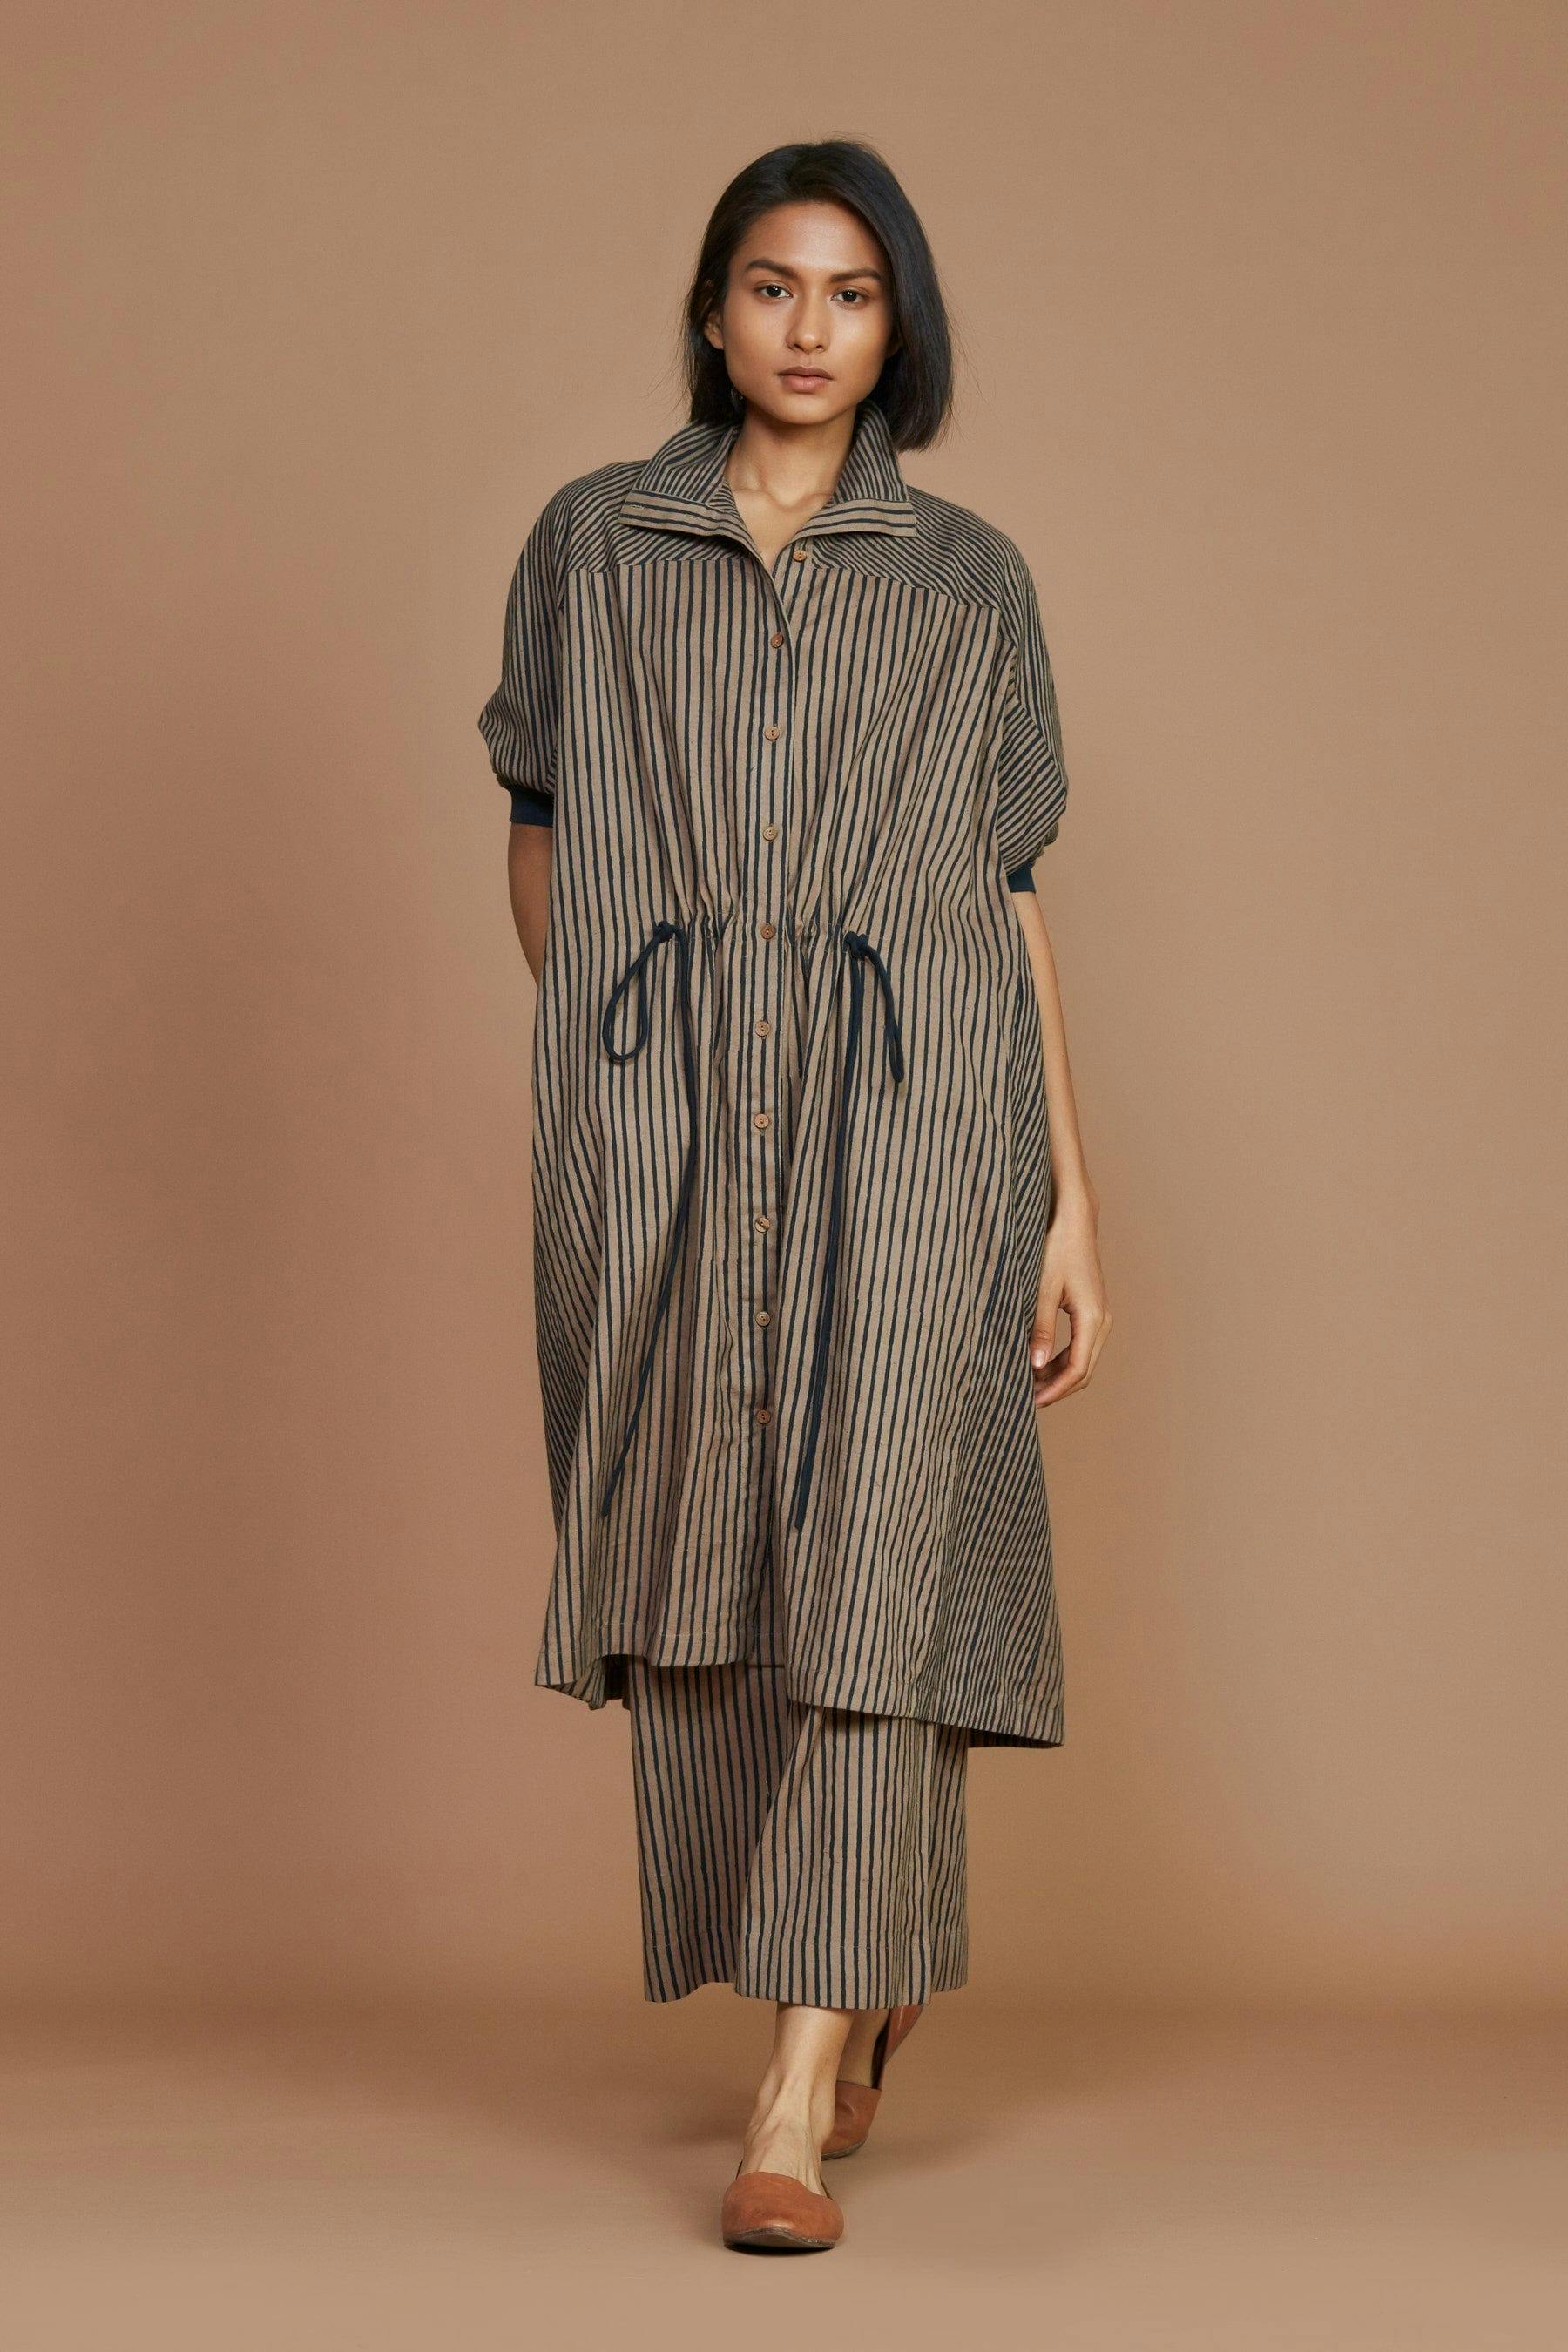 Brown With Charcoal Striped Kaftan Co-Ord Set, a product by Style Mati